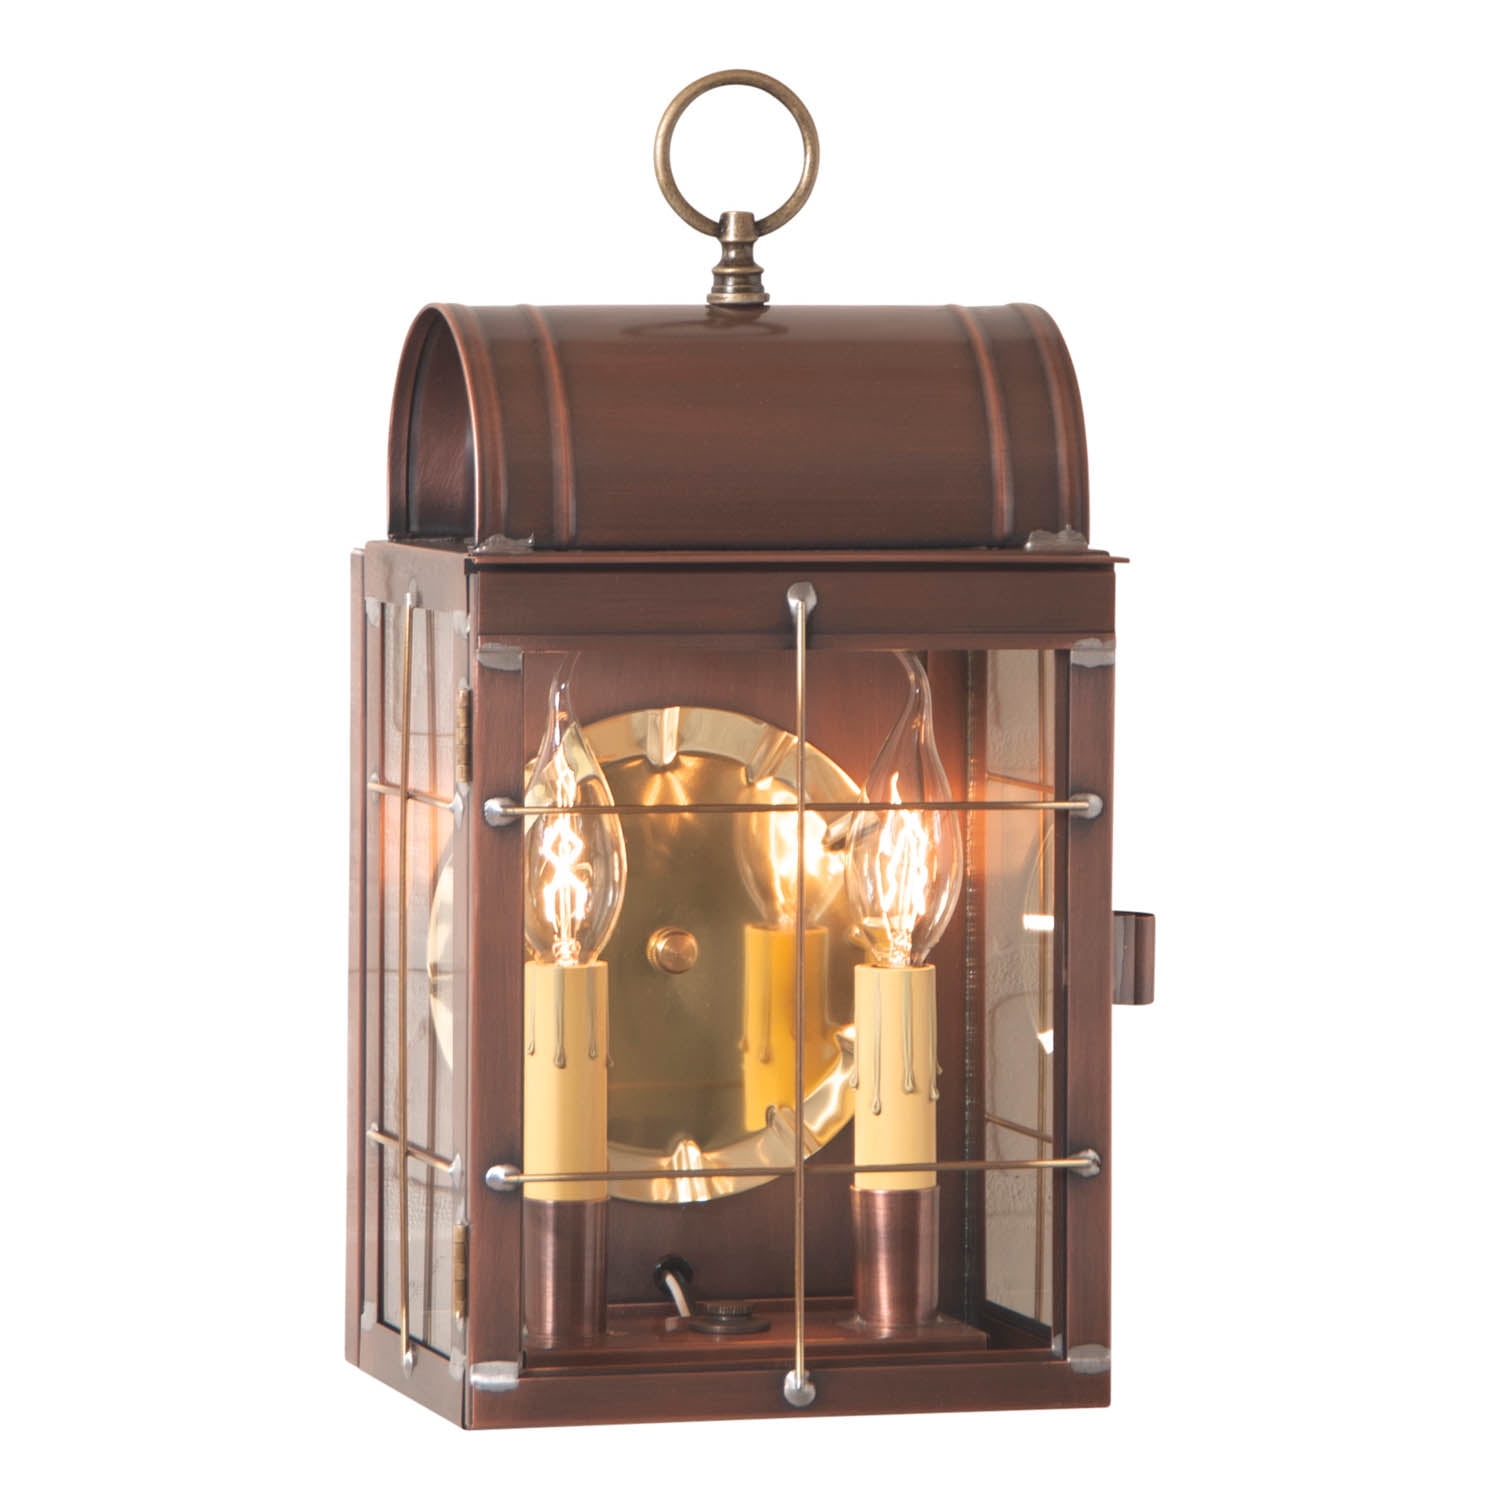 Irvins Tinware Cape Cod Outdoor Wall Lantern Antique Copper NEW Free SHIP! 